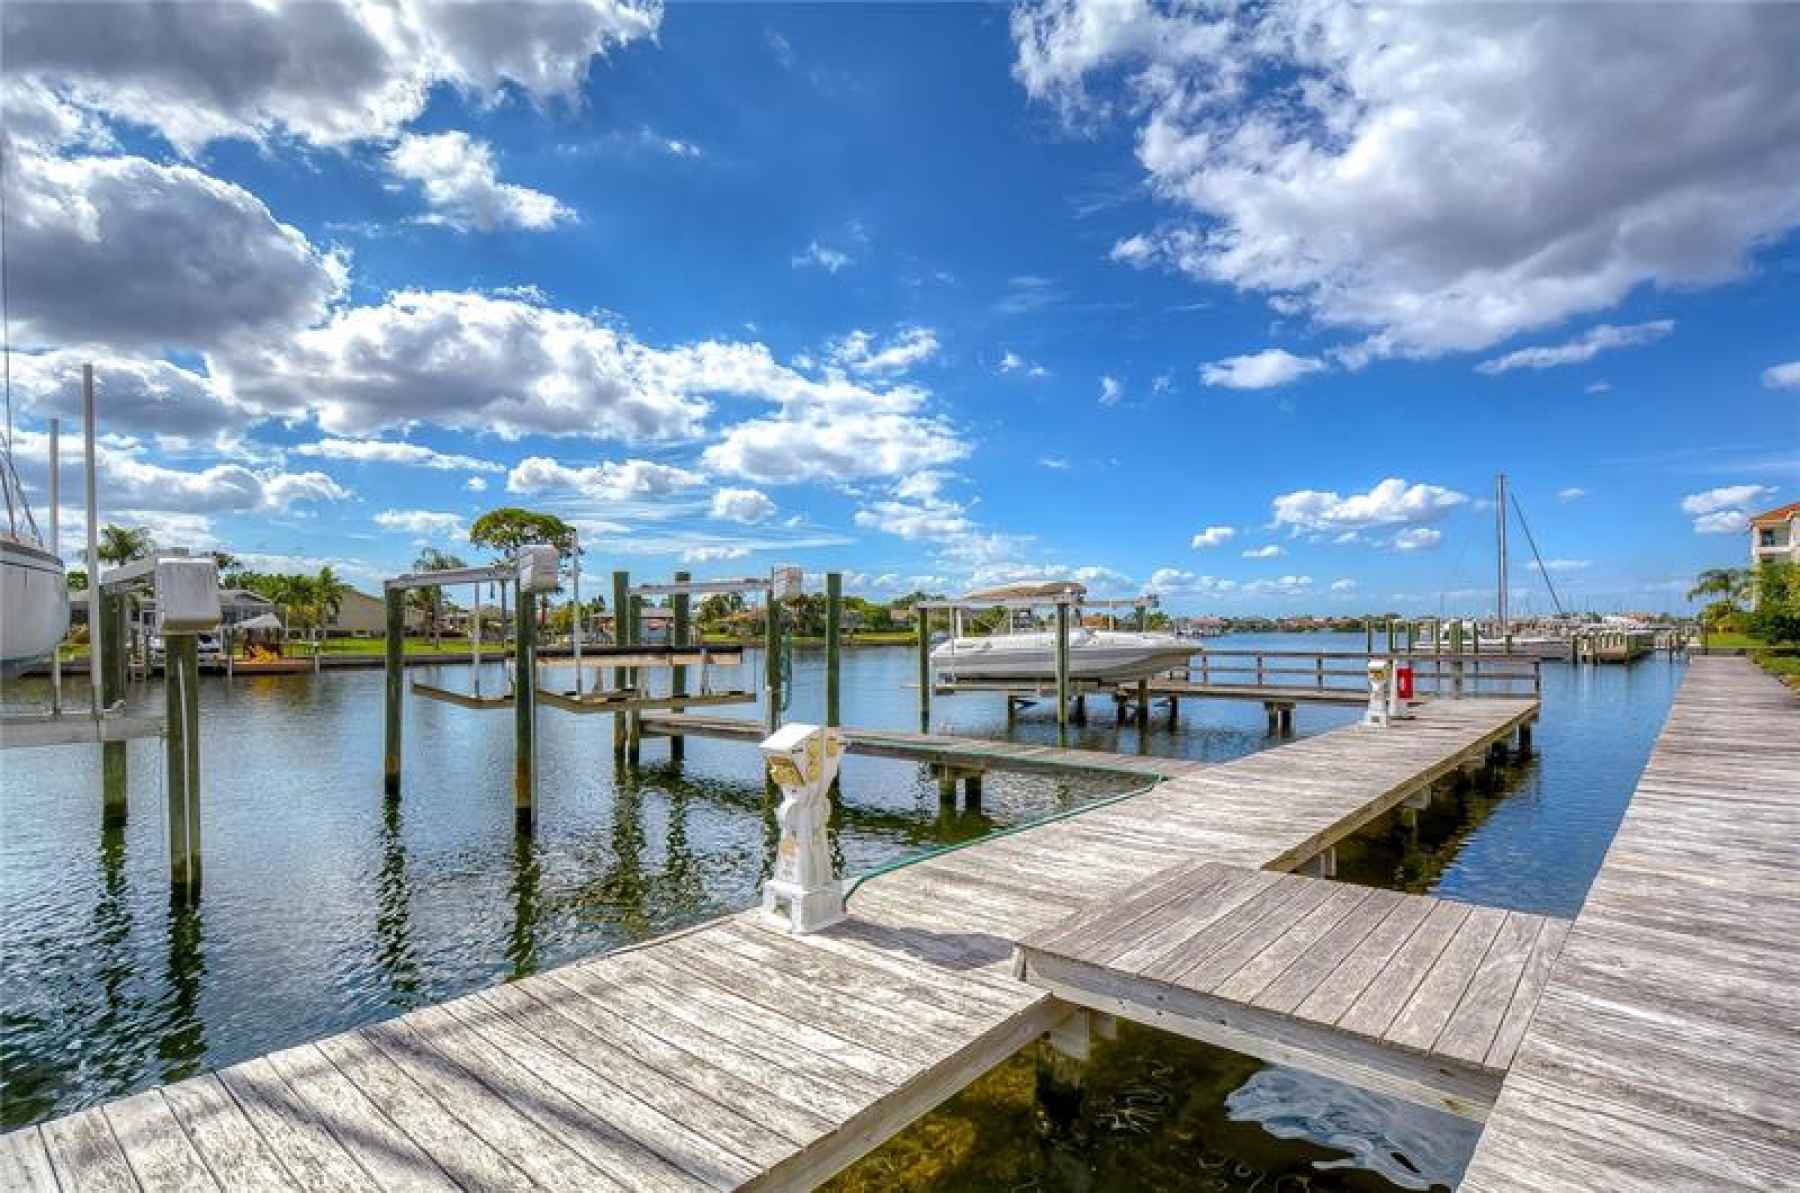 A boaters dream, you have a direct deep water canal access to the Bay and the Gulf of Mexico!